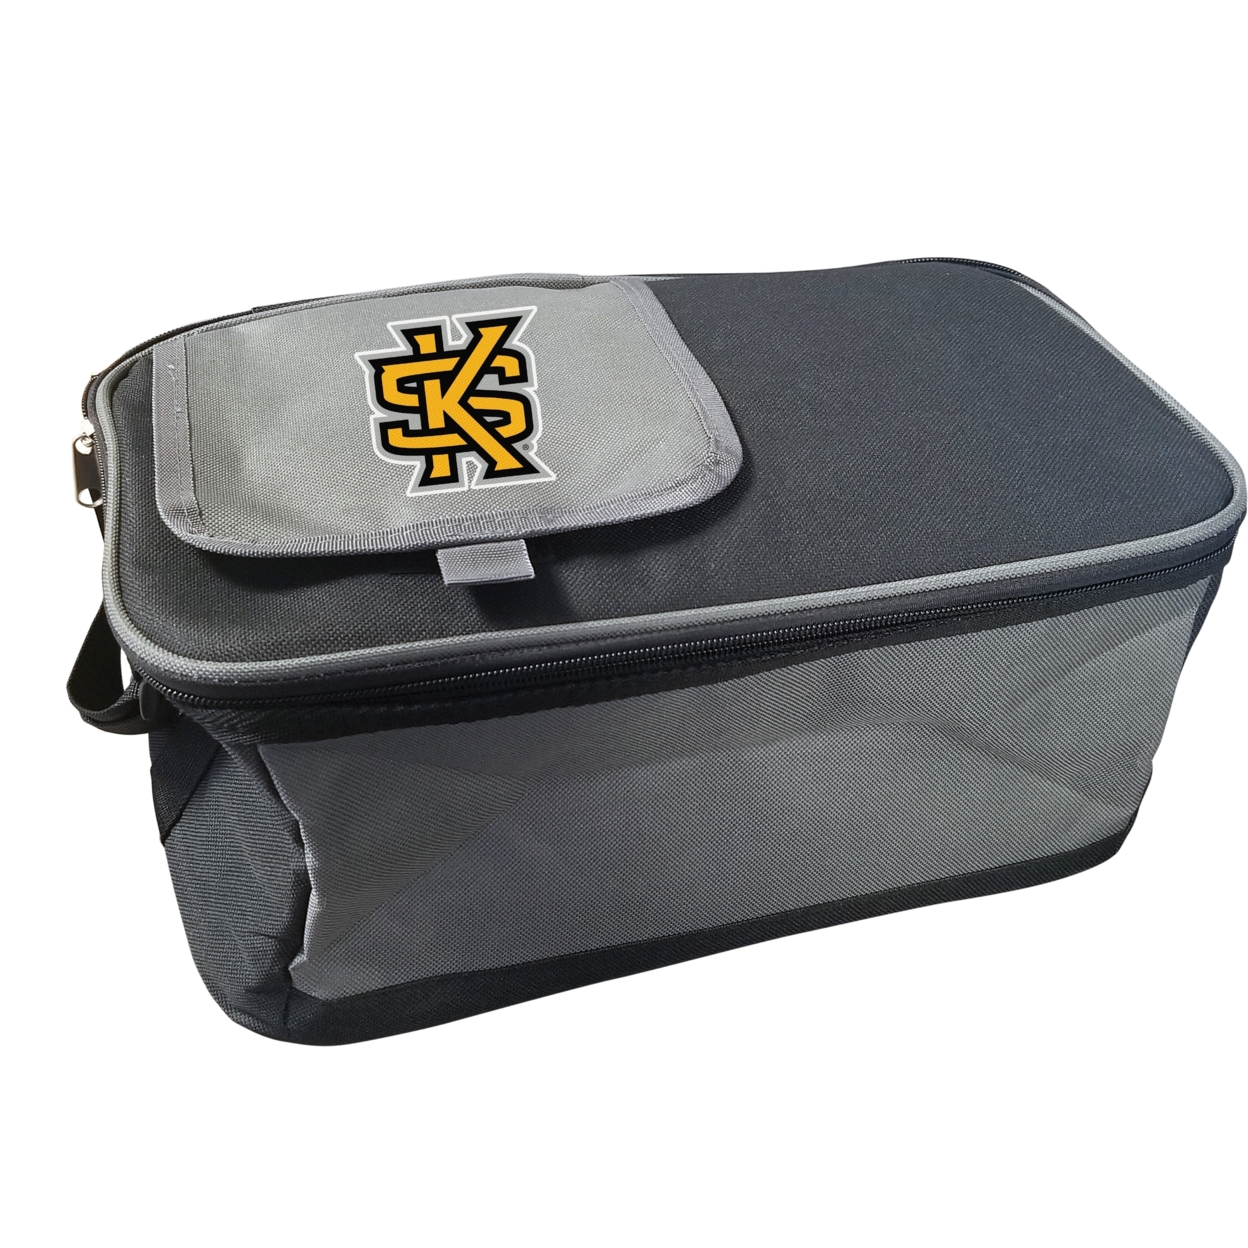 Kennesaw State Unviersity 9 Pack Cooler